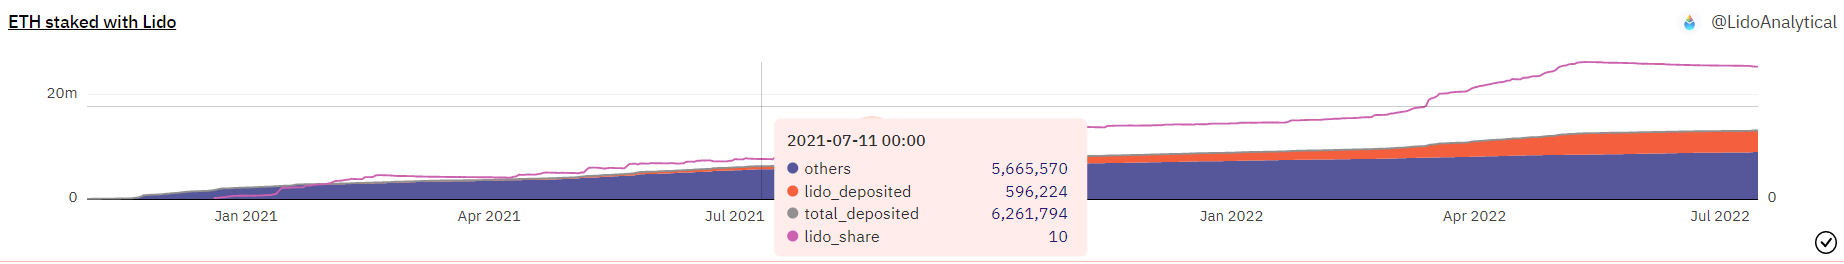 ETH Staked on LIDO